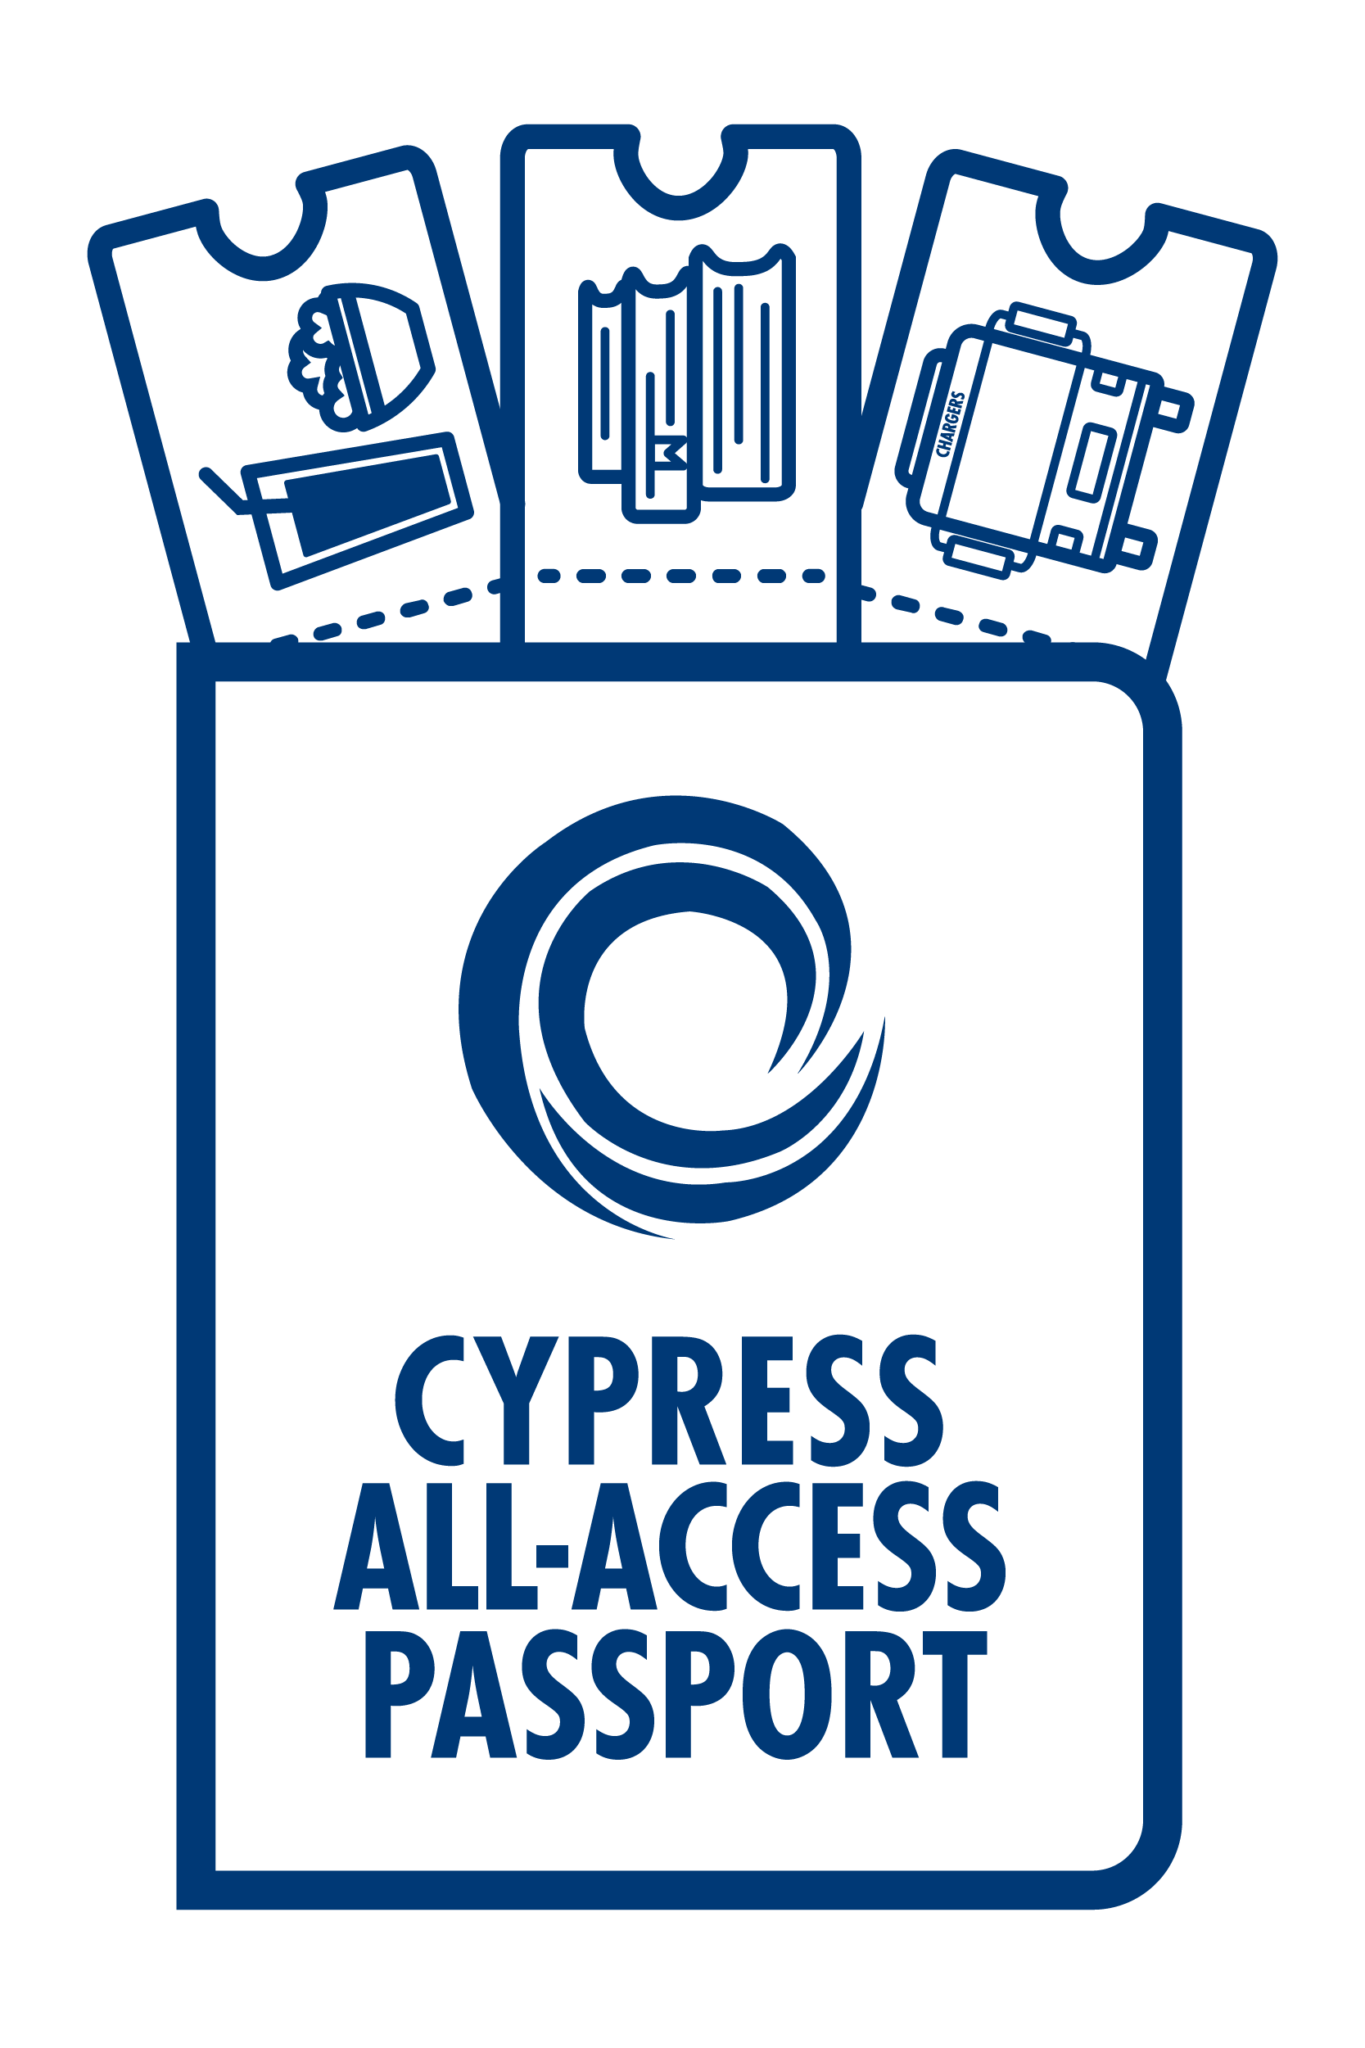 icon shaped like a passport with the Cypress College "C" swirl and "Cypress All-Access Passport," along with three tickets coming out of the top